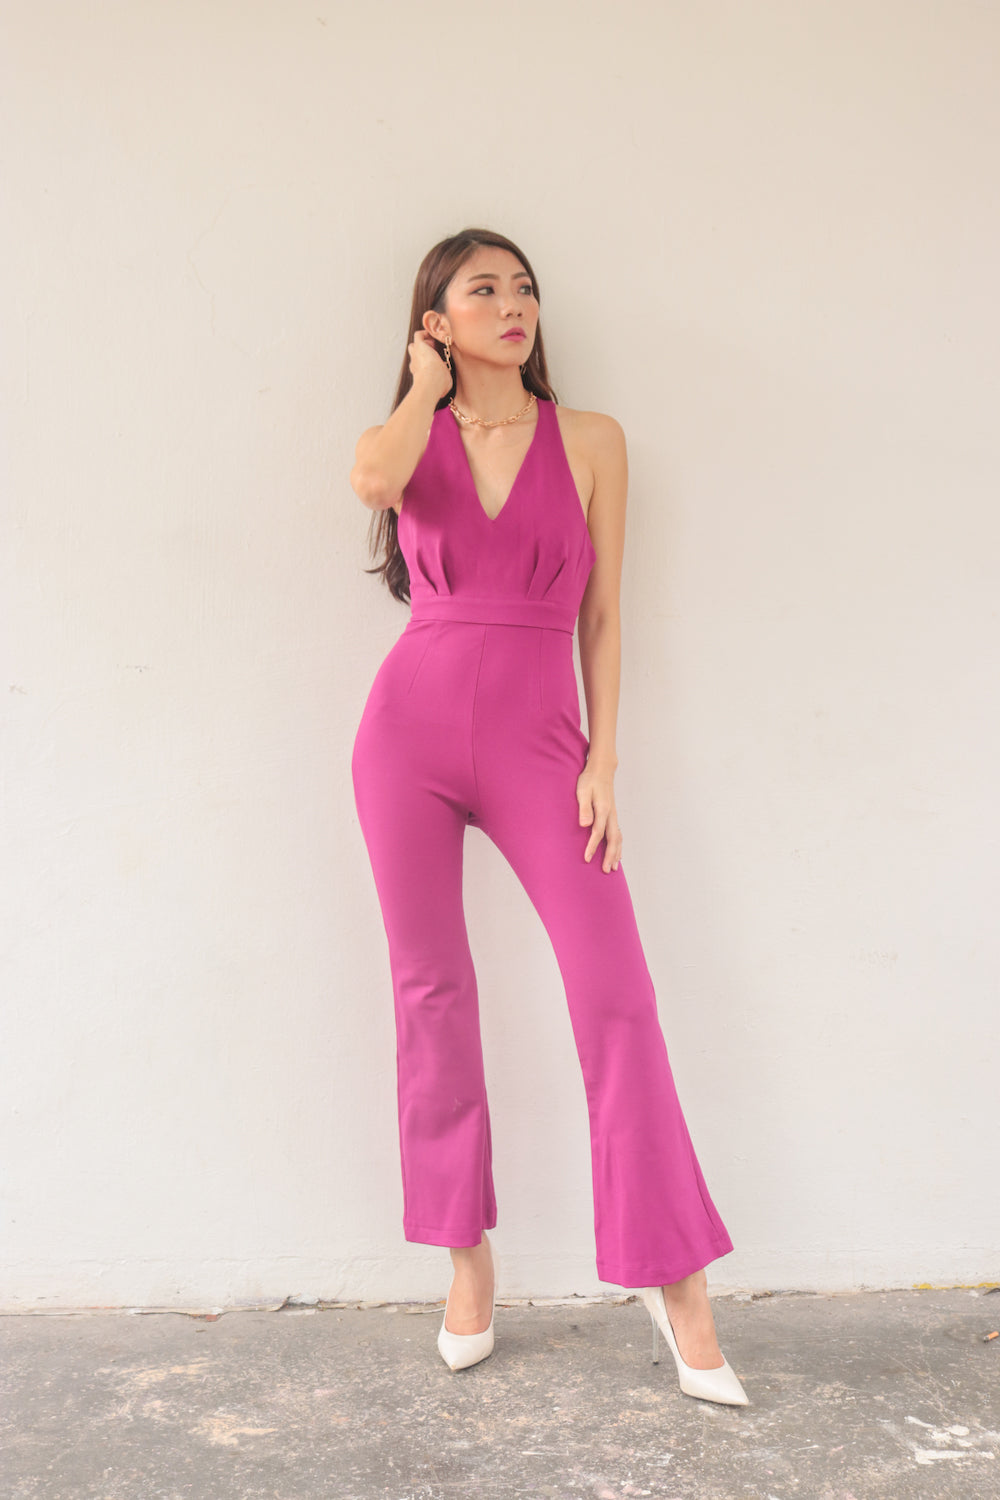 * PREMIUM * - Fiolia Halter Jumpsuit in Magenta - Self Manufactured by LBRLABEL only